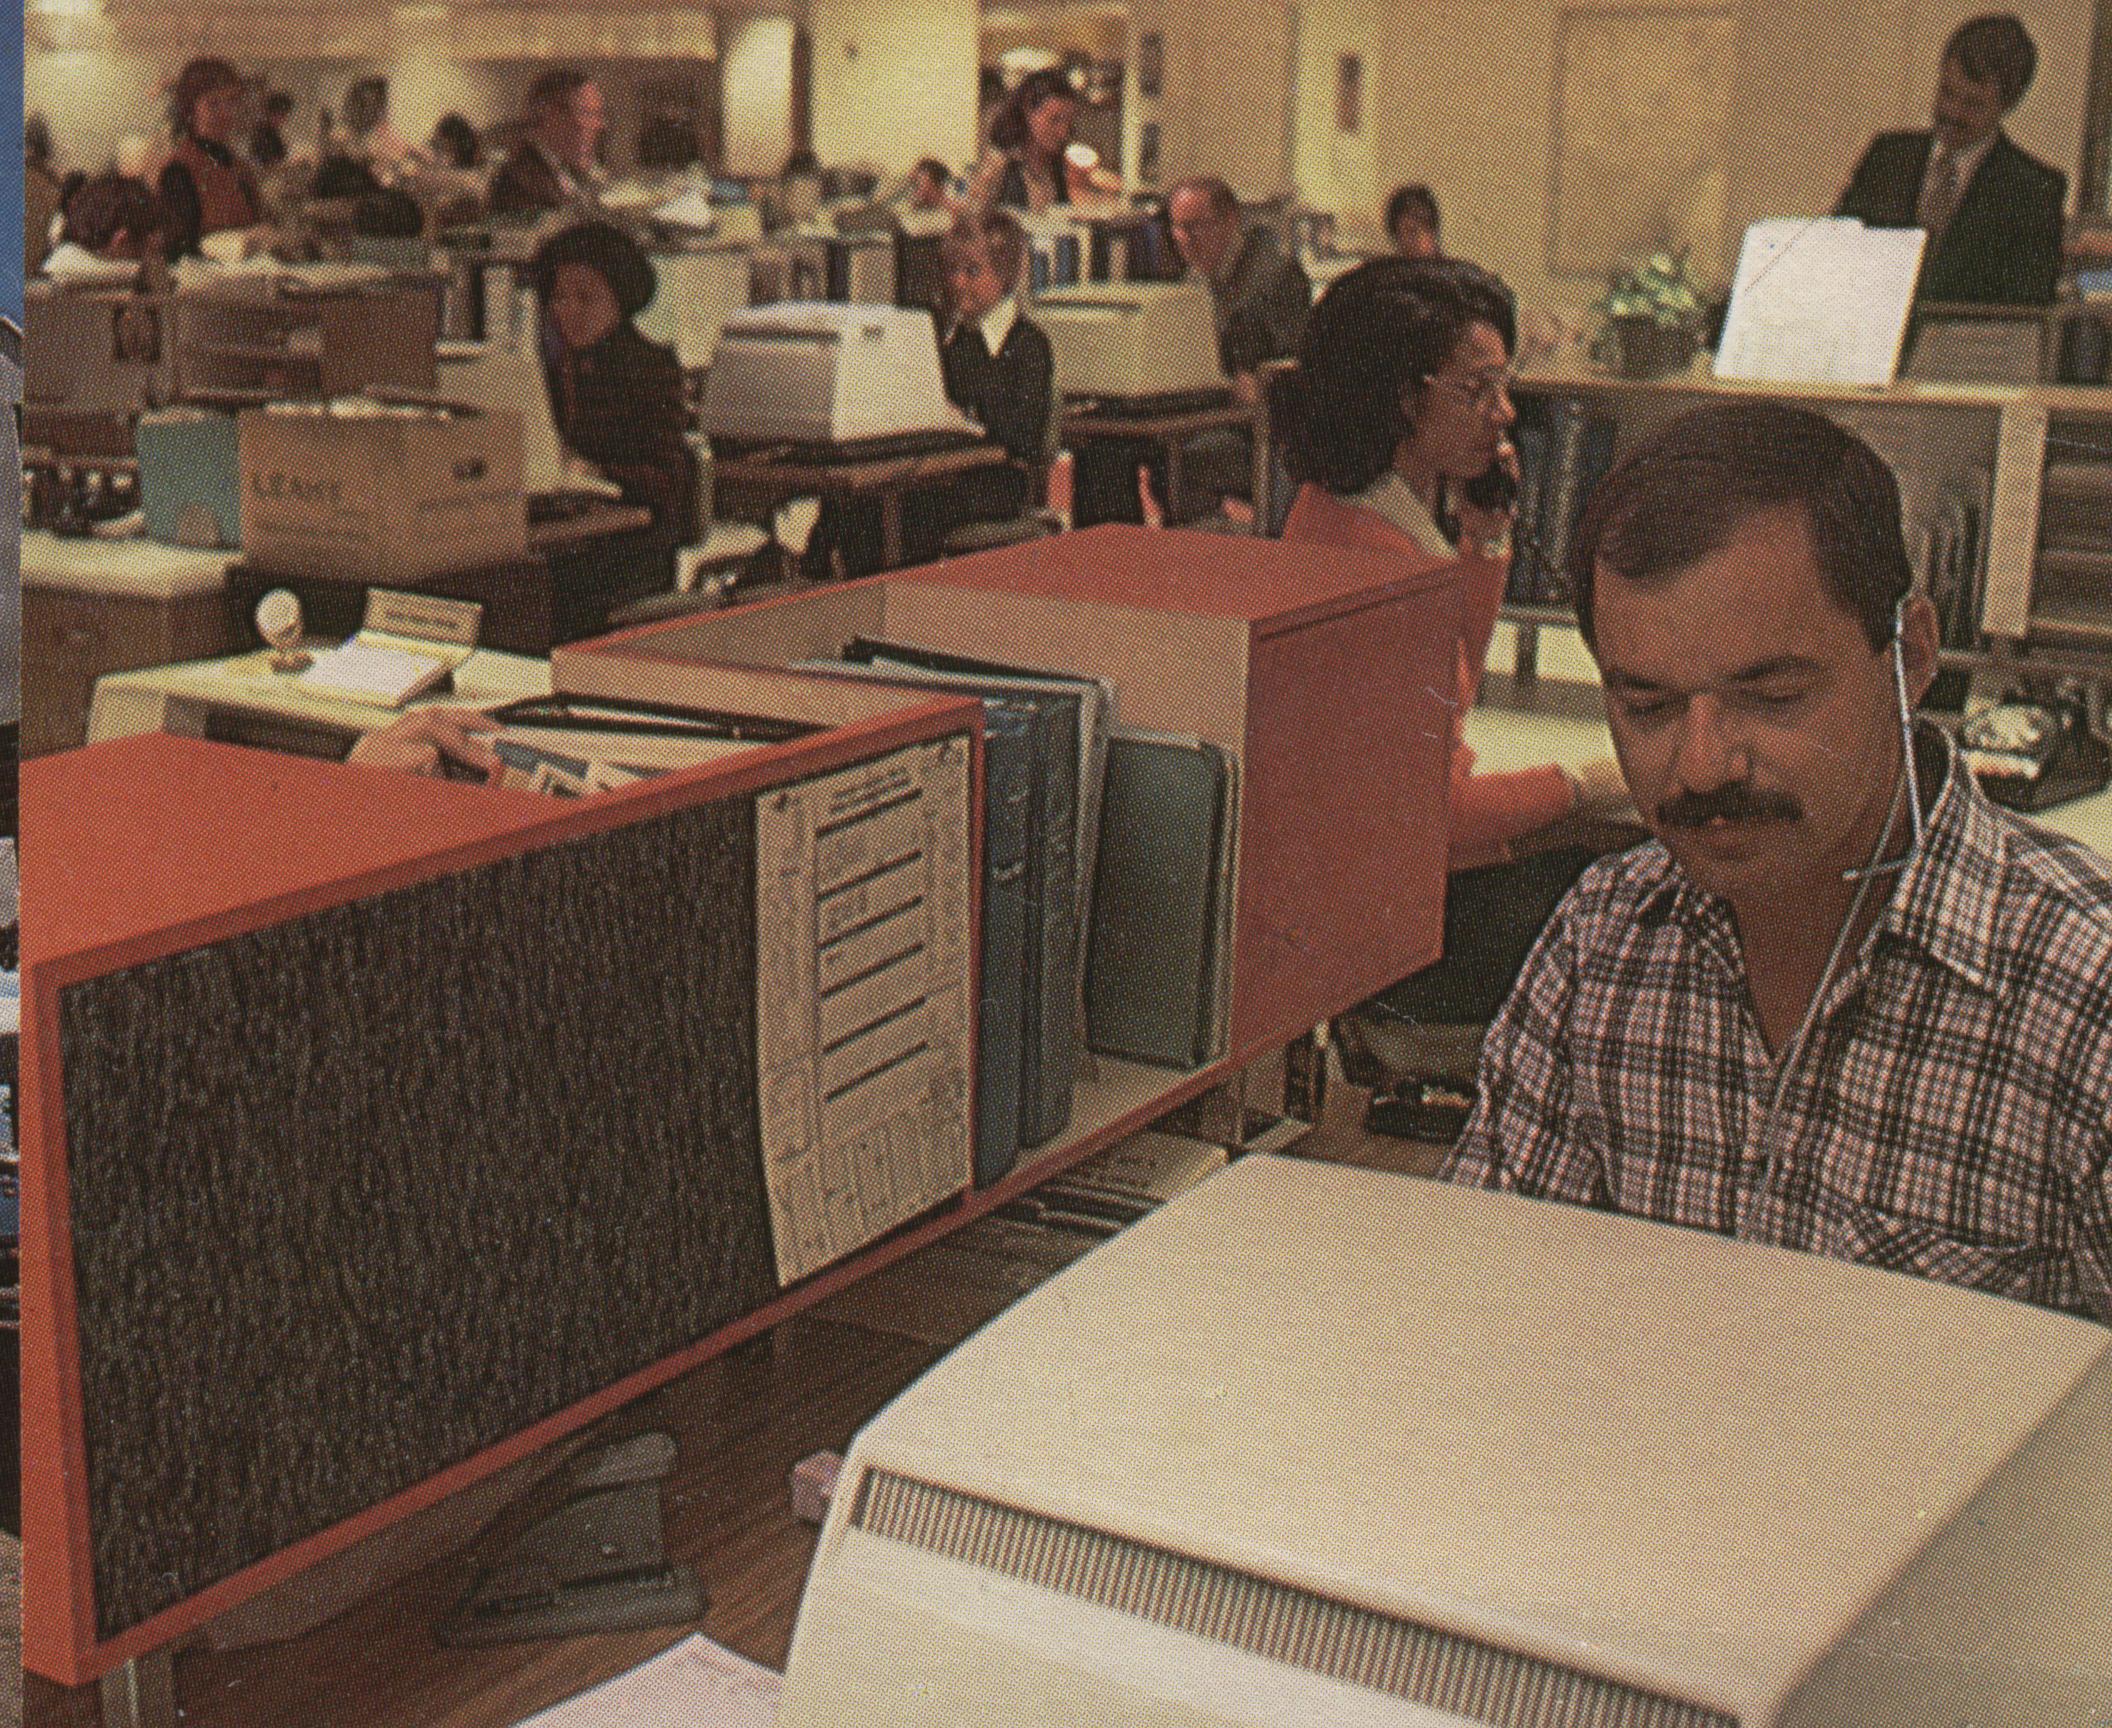 1977 The New York Reservations Office on the Fourth Floor of the Pan Am Building.